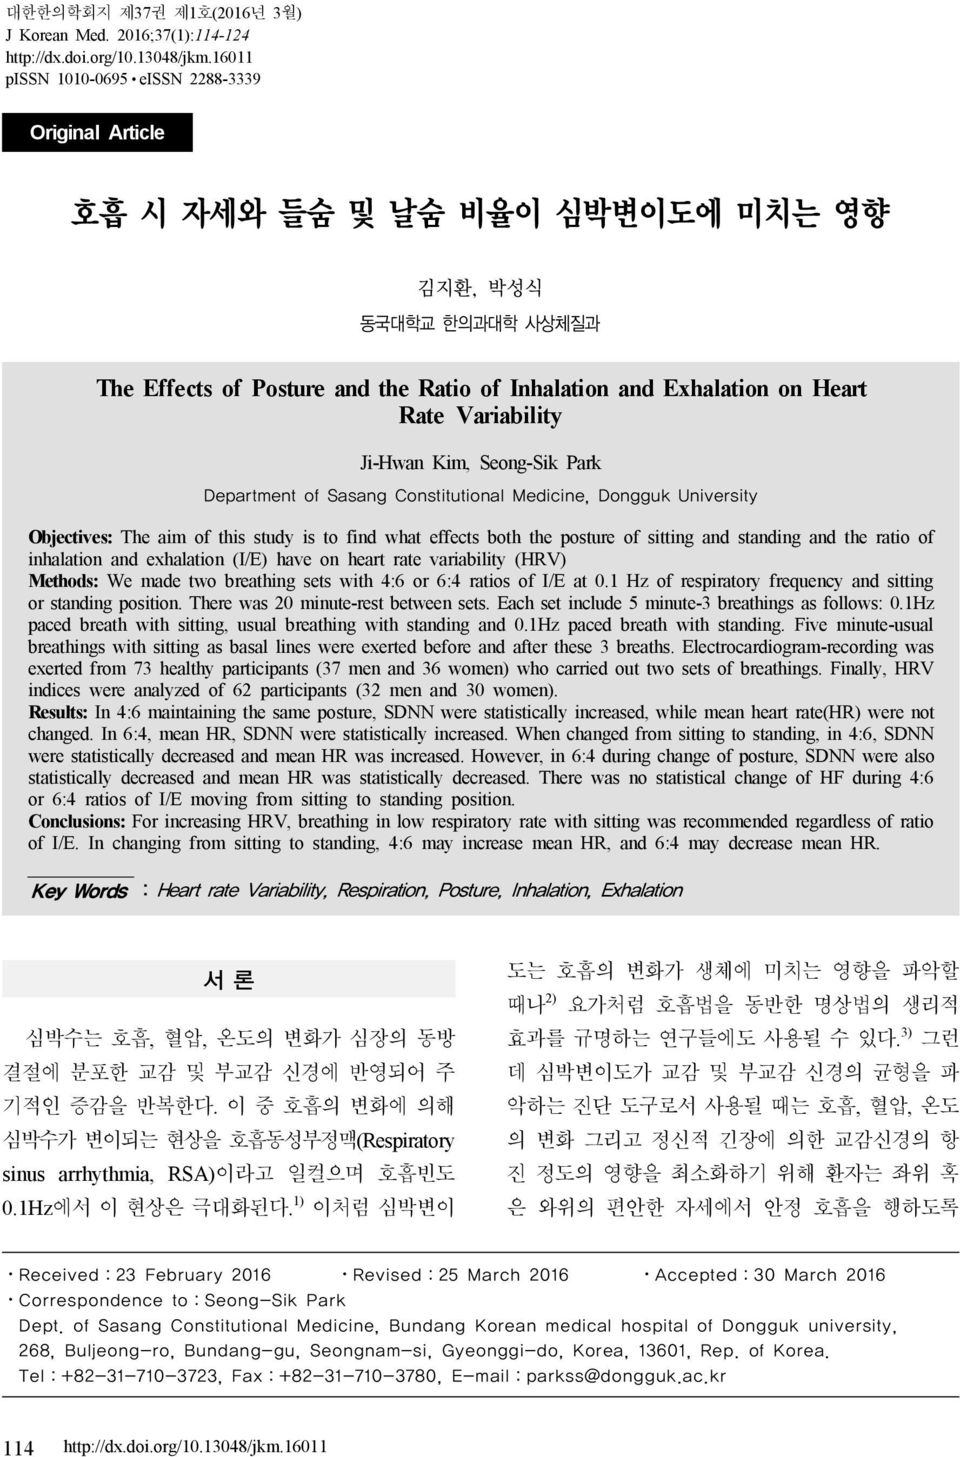 Heart Rate Variability Ji-Hwan Kim, Seong-Sik Park Department of Sasang Constitutional Medicine, Dongguk University Objectives: The aim of this study is to find what effects both the posture of